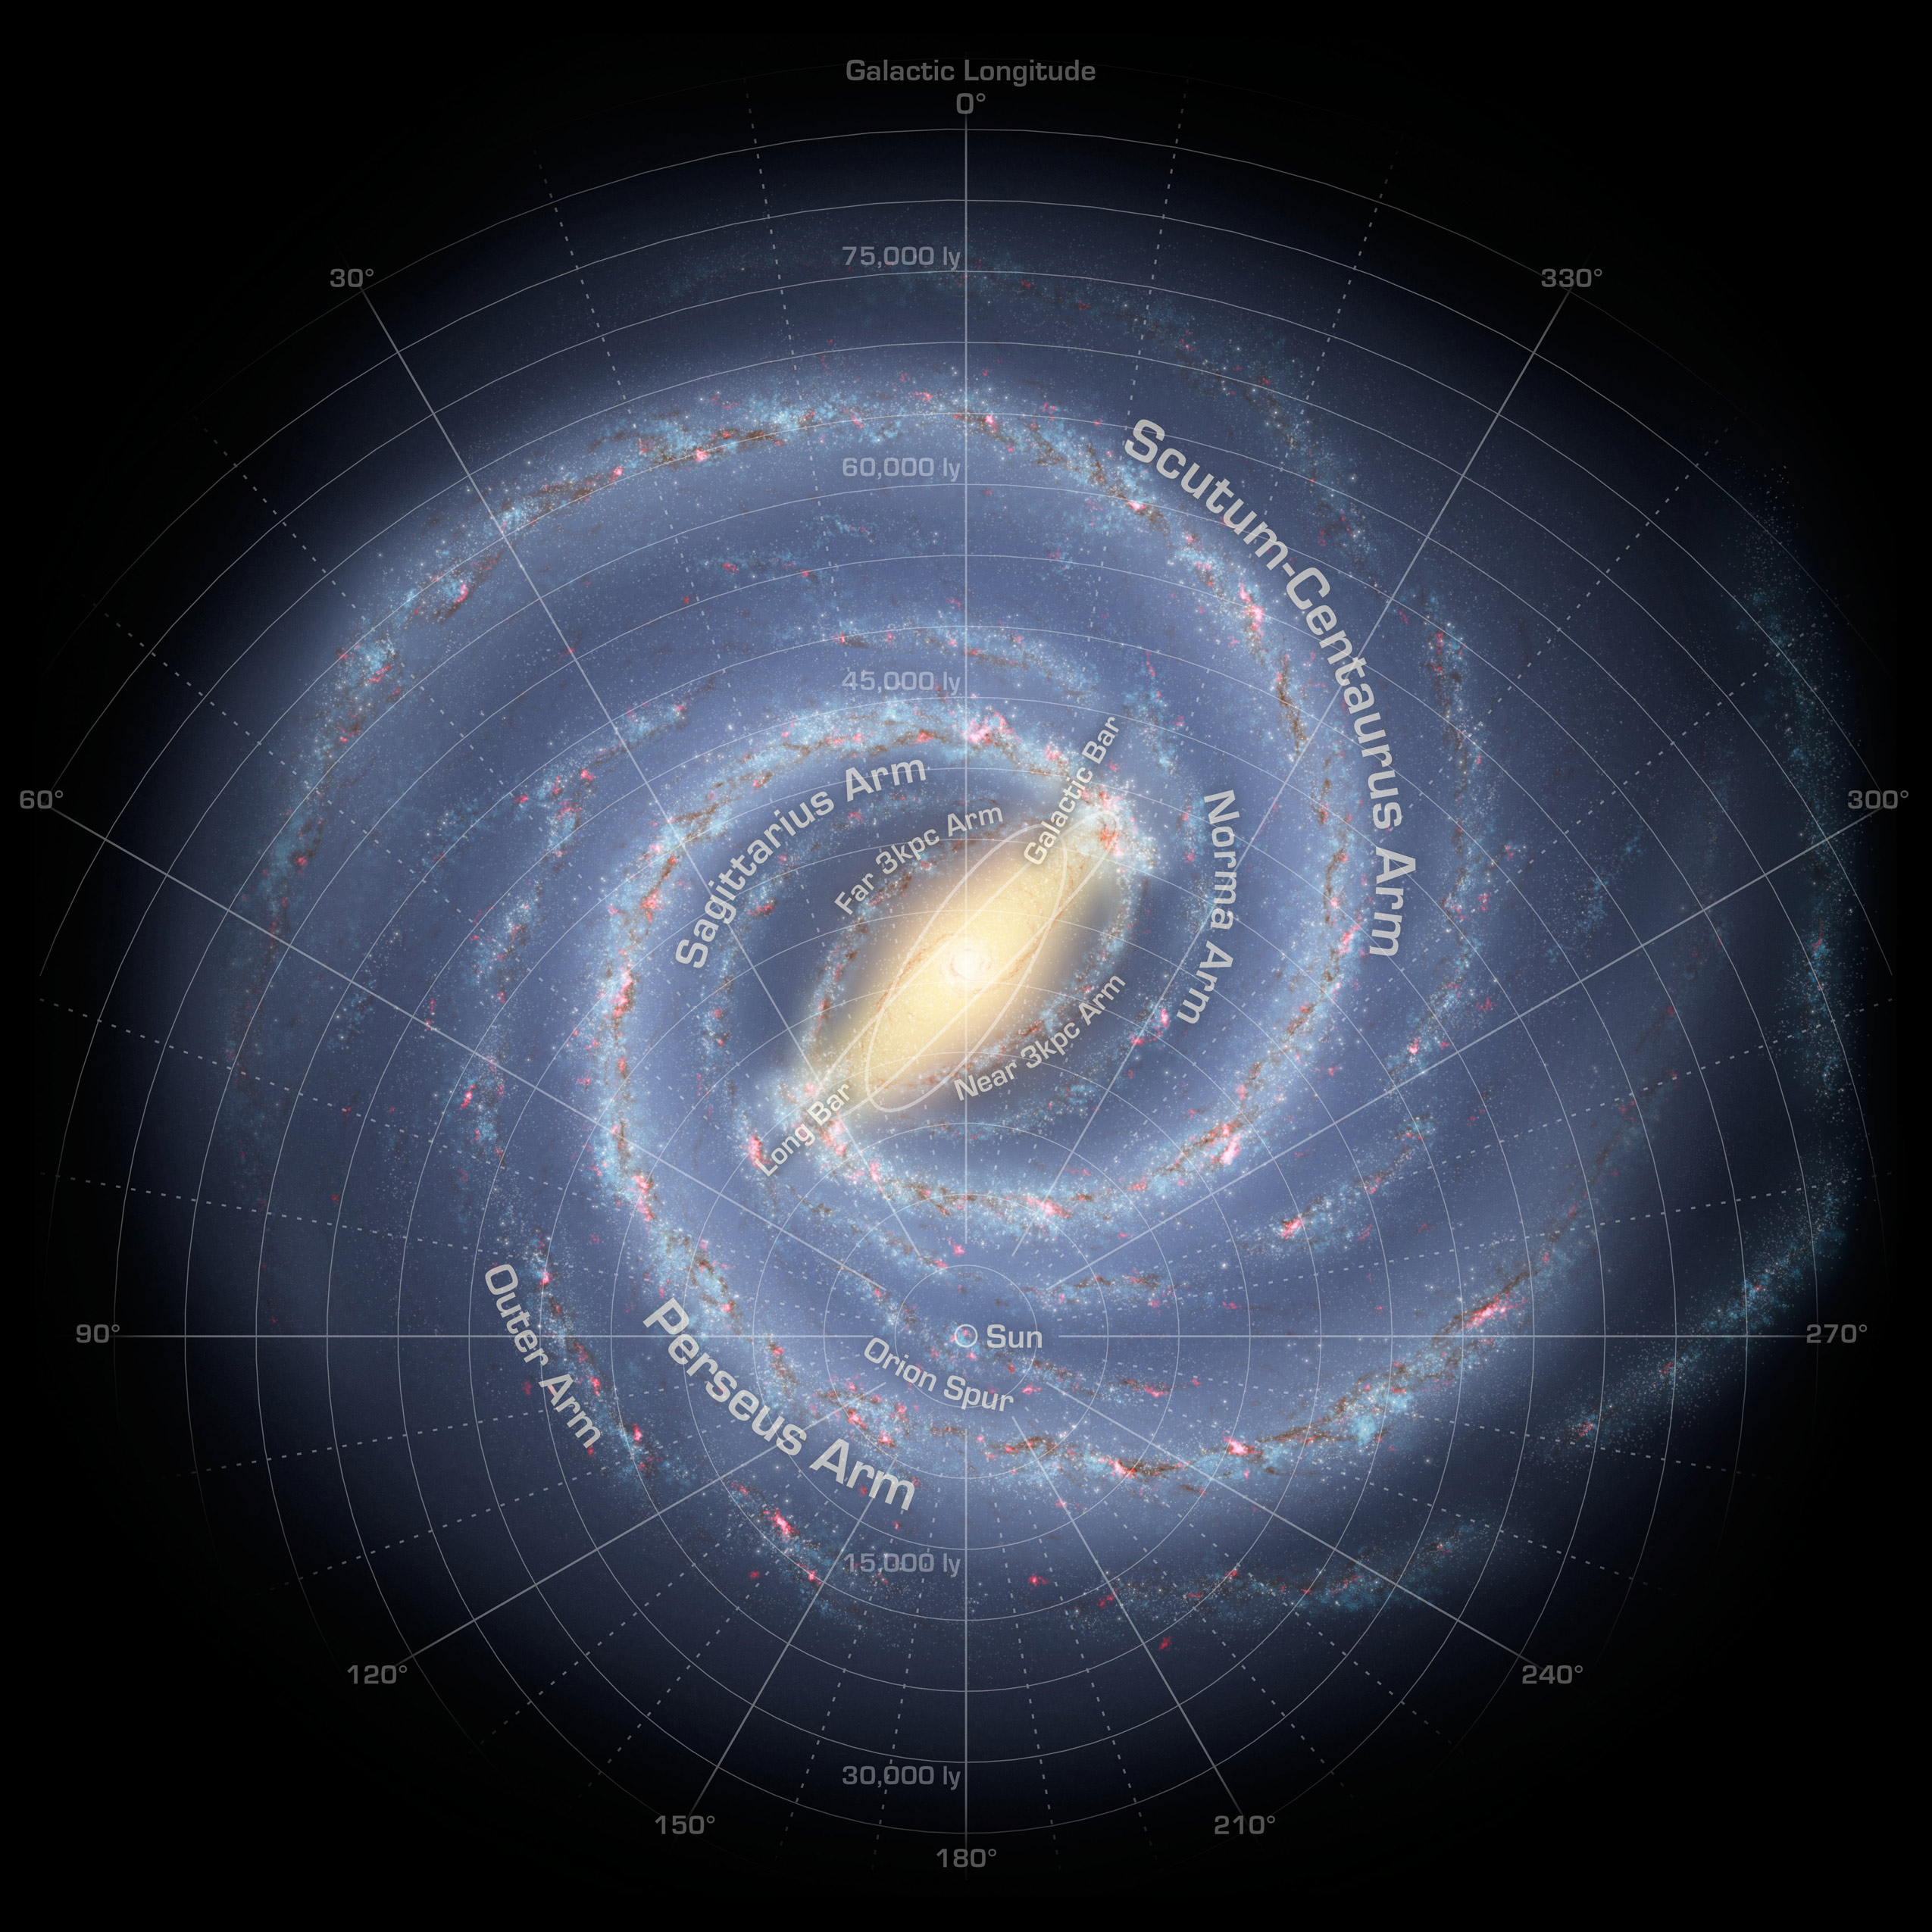 WISE Helps Chart the Milky Way From the Inside Out